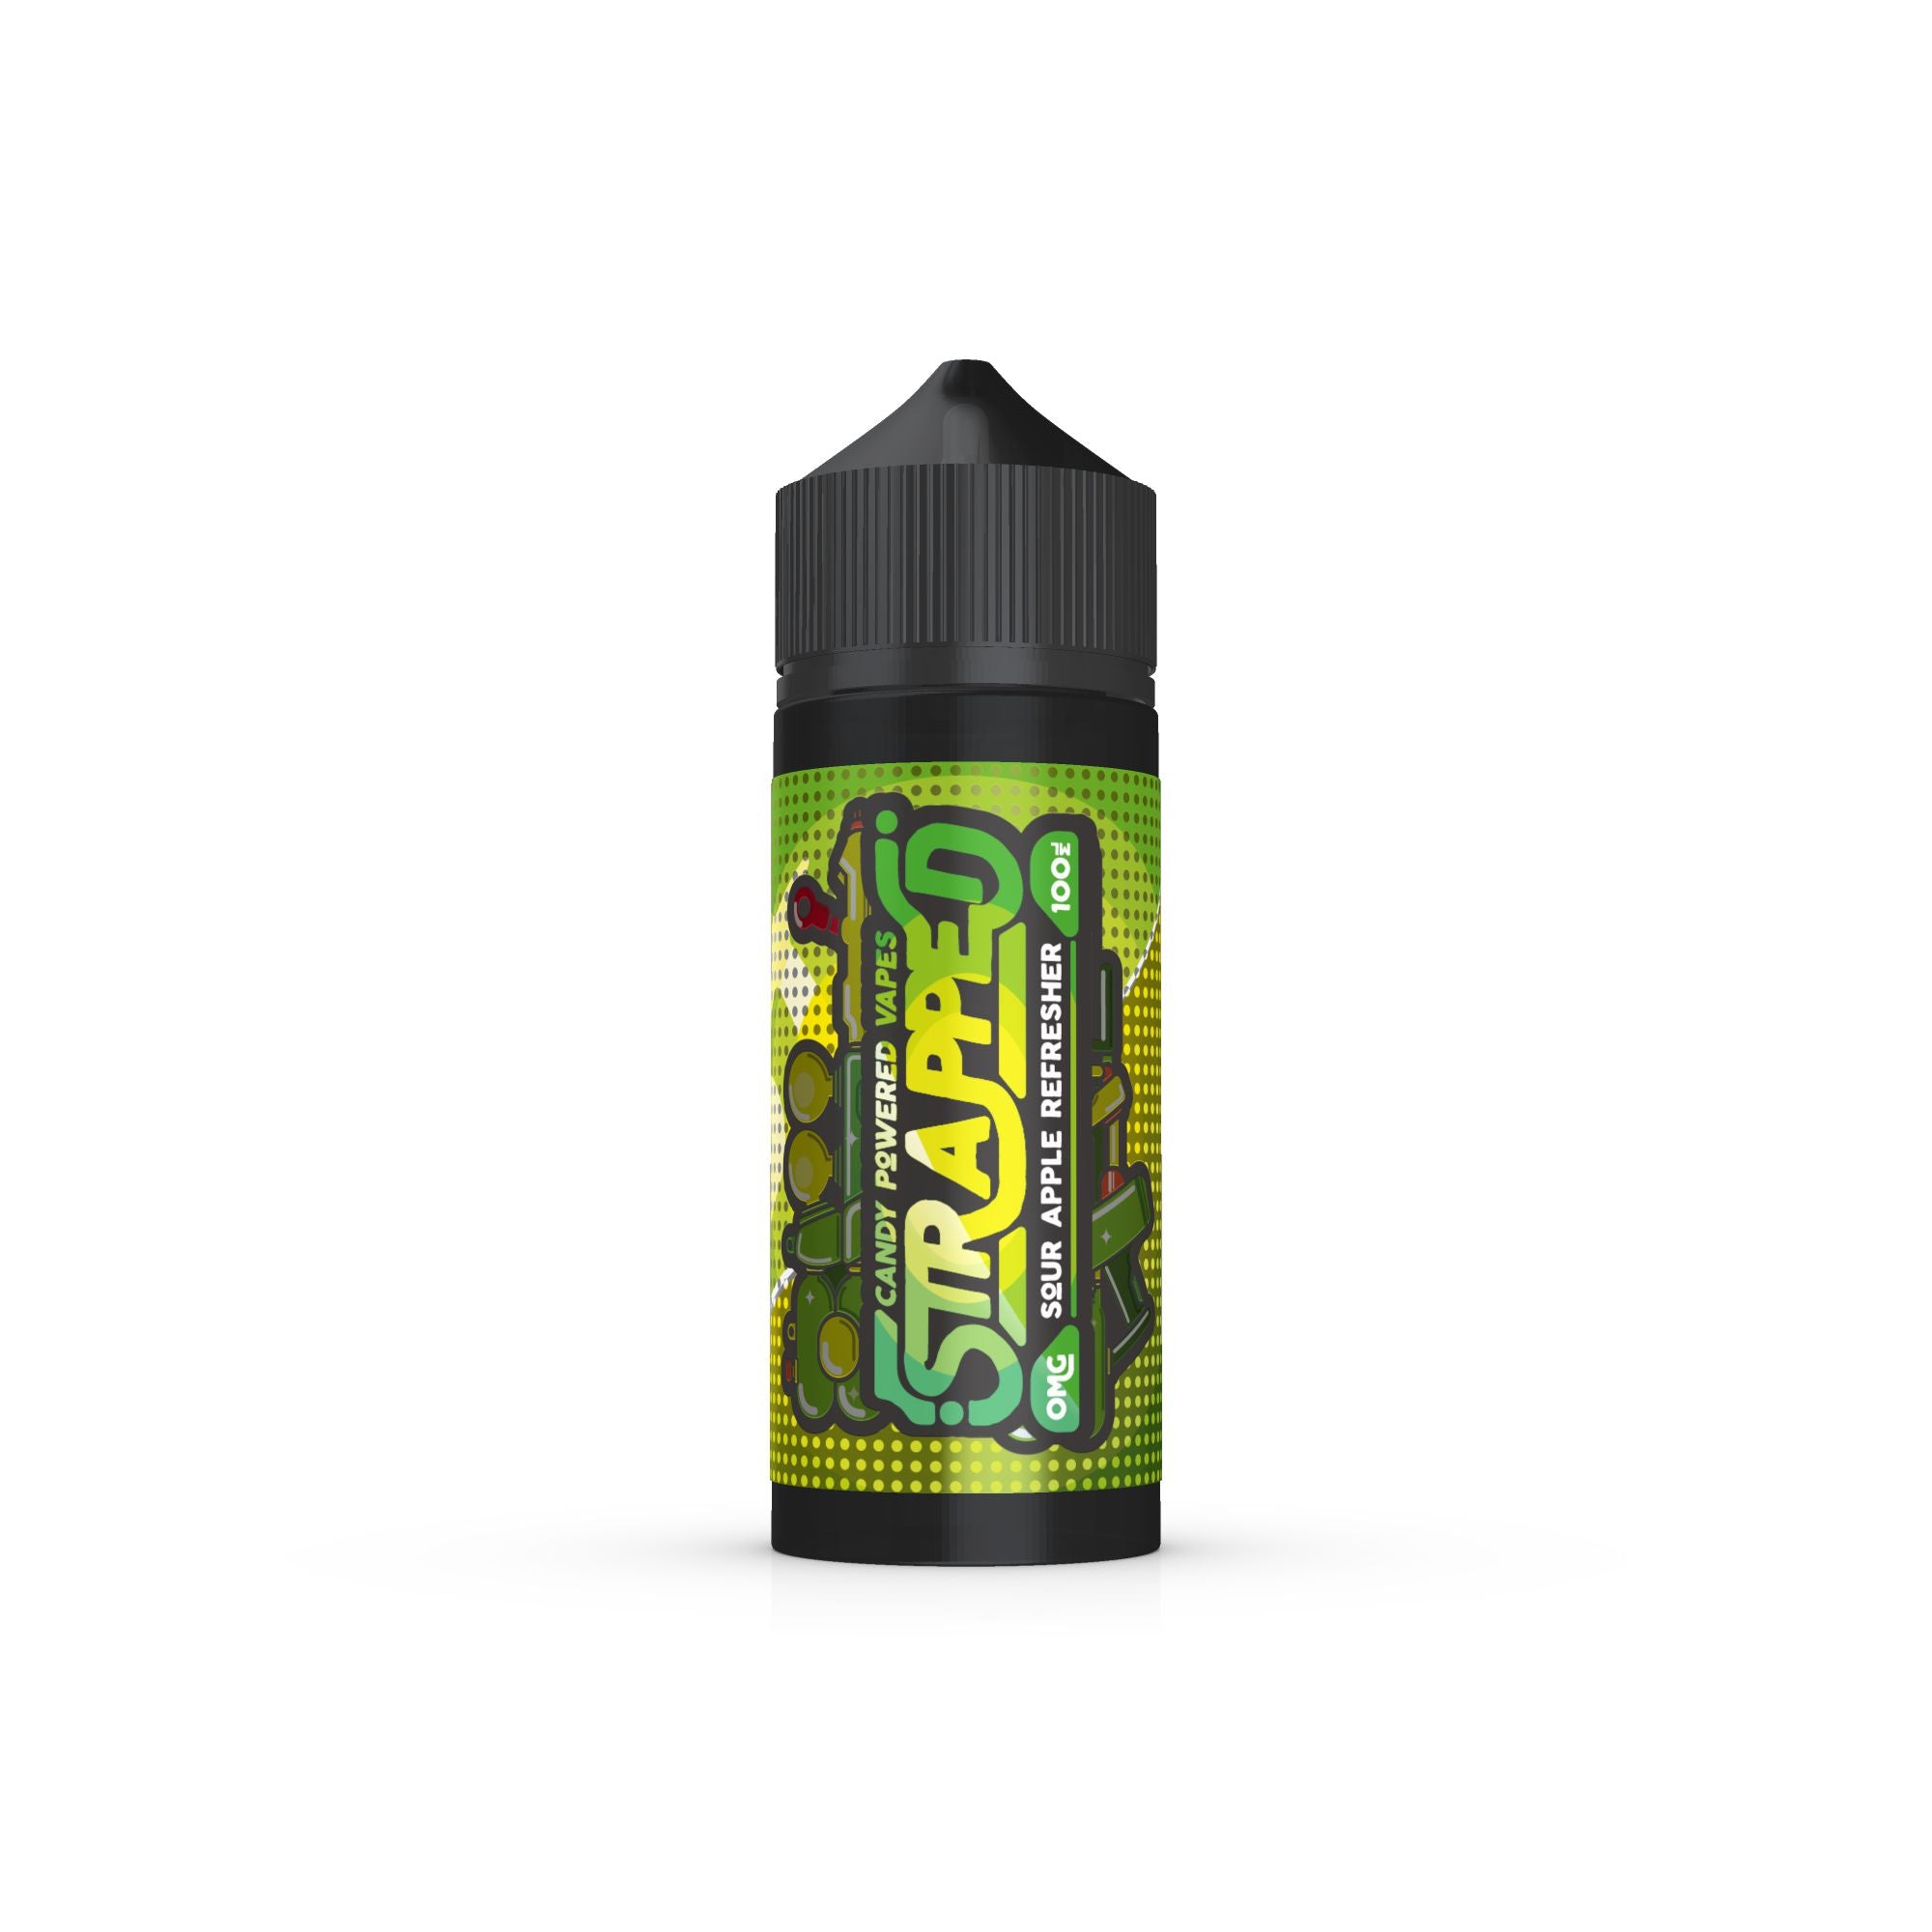 Sour Apple Refresher Shortfill by Strapped. - 100ml-Supergood.